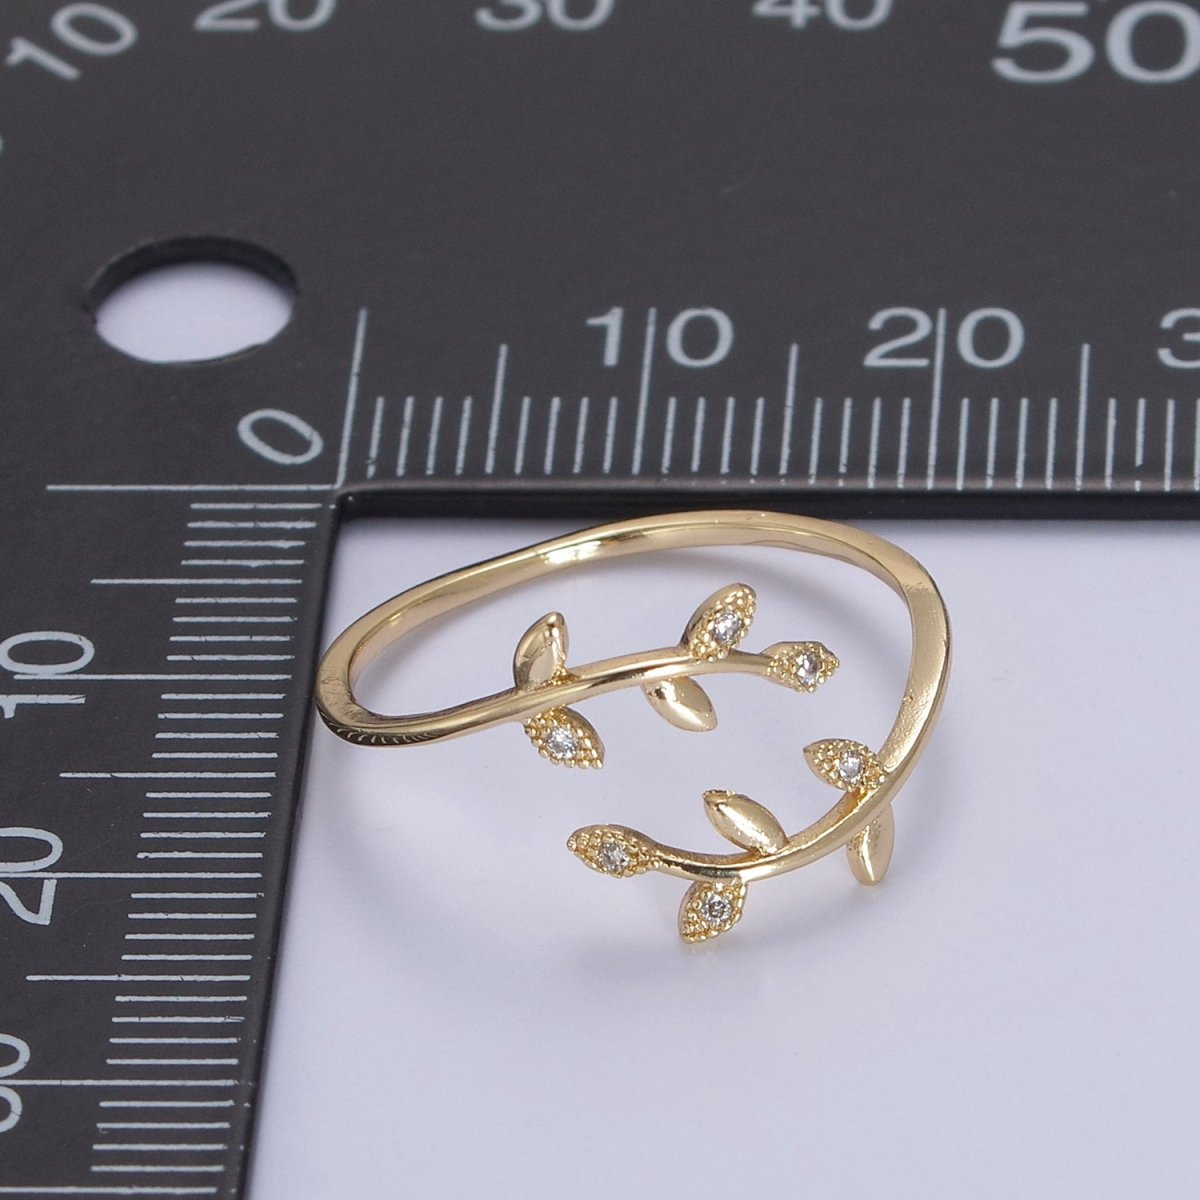 Micro Pave Olive Vine Leaf Adjustable Ring, Crystal Cubic Zirconia CZ Mother Nature Stacking Ring, Minimalist 16K Gold Filled Ring, Gift For Her Plant Mom U-436 - DLUXCA